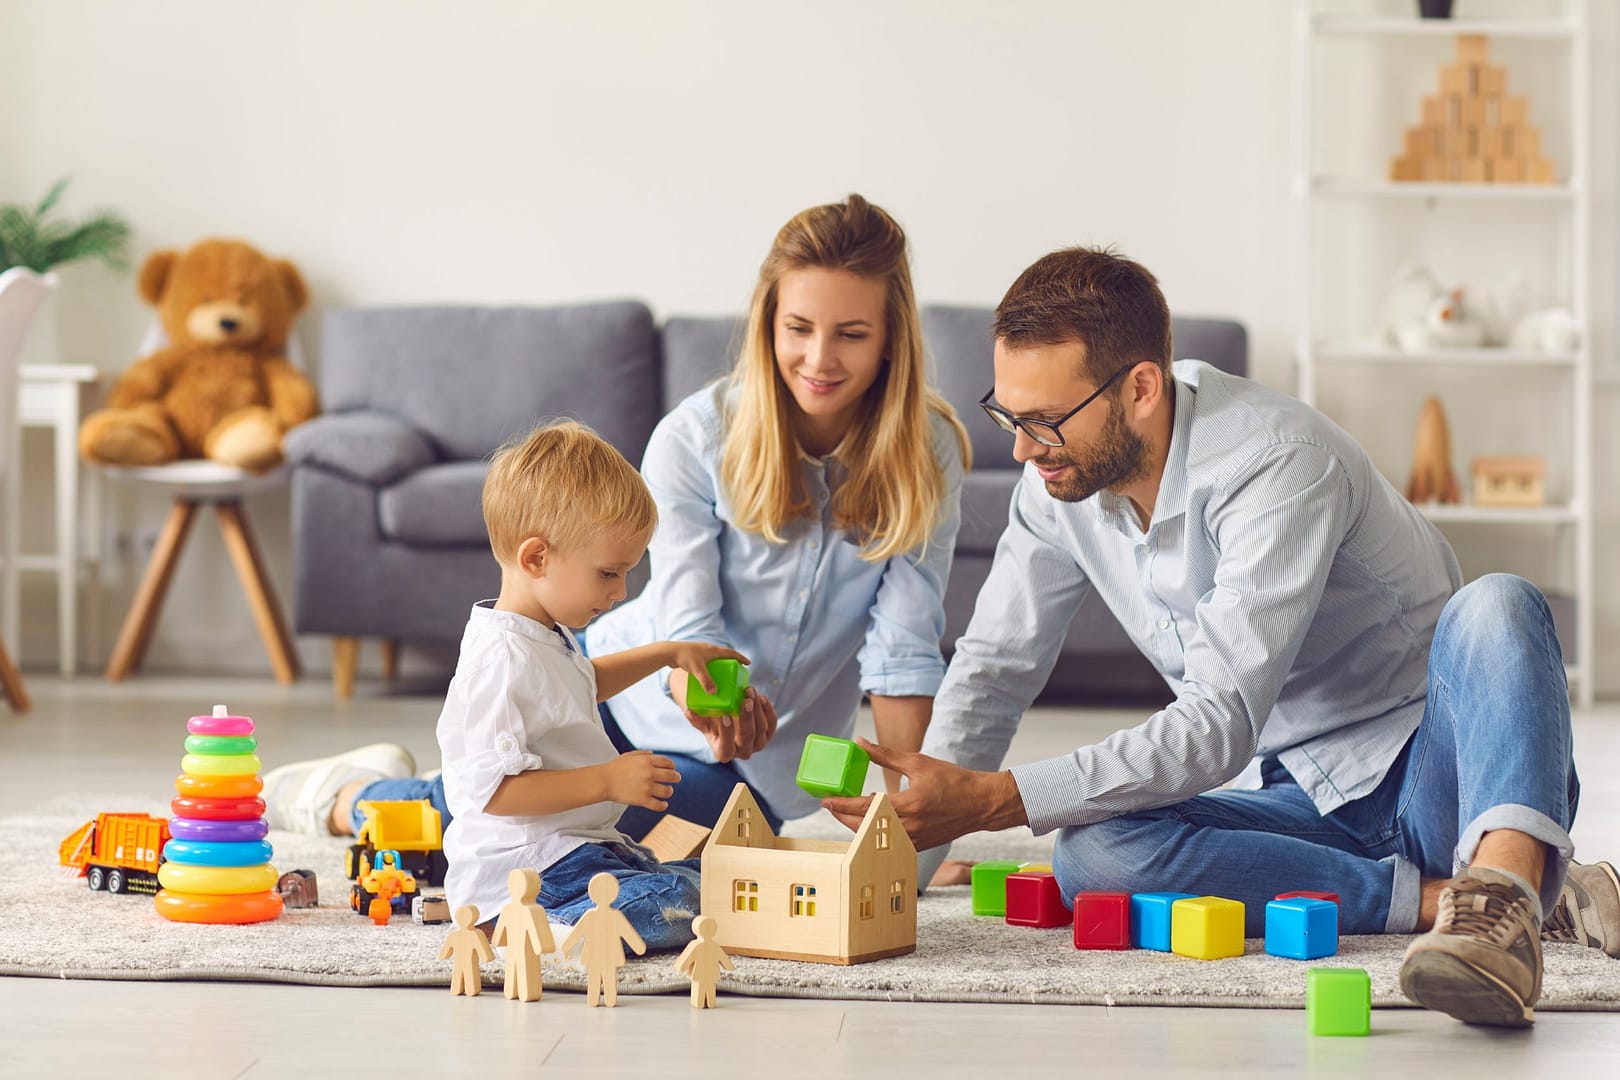 Parents playing with their young son on a rug. There are coloured blocks, trucks, and wooden toys.